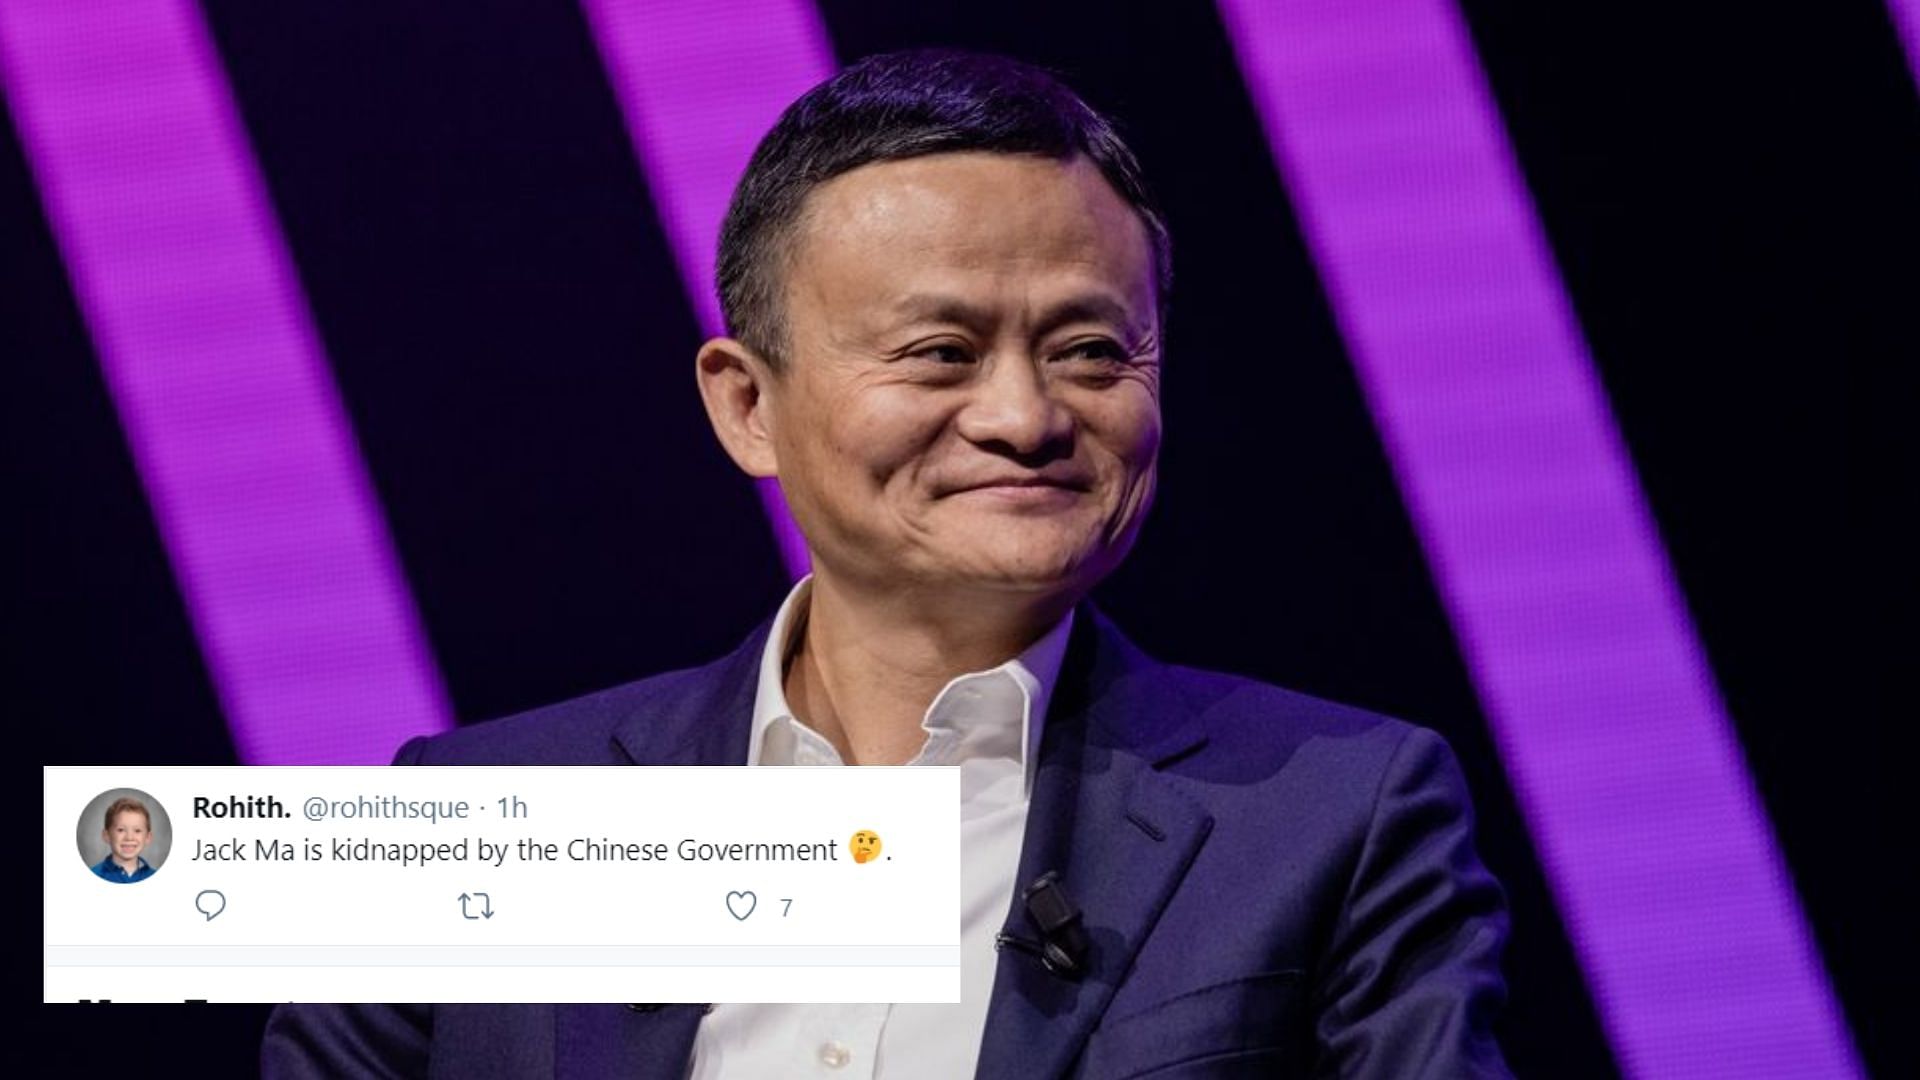 Twitter Concerned as Jack Ma Goes Missing After Rift With Govt